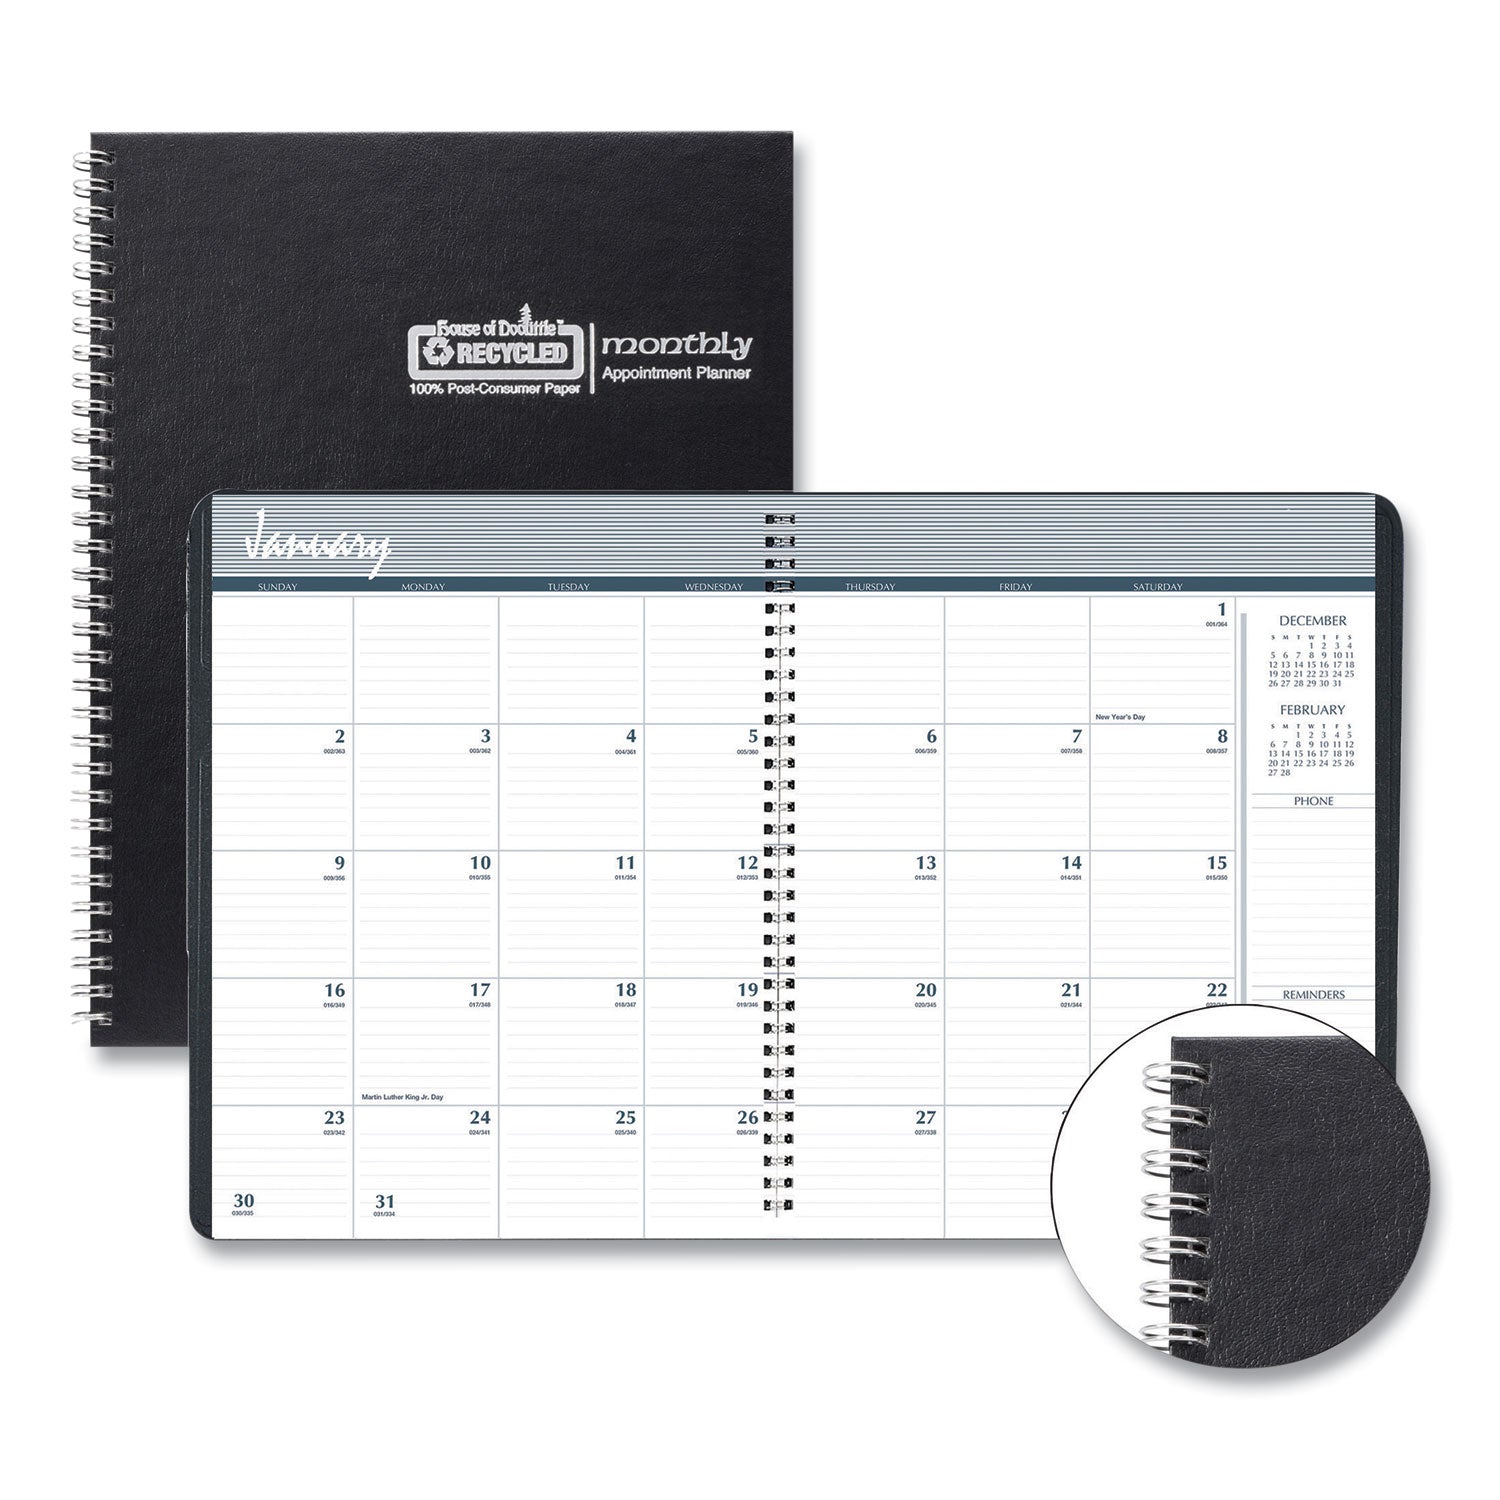 monthly-hard-cover-planner-11-x-85-black-cover-14-month-dec-to-jan-2023-to-2025_hod26292 - 1